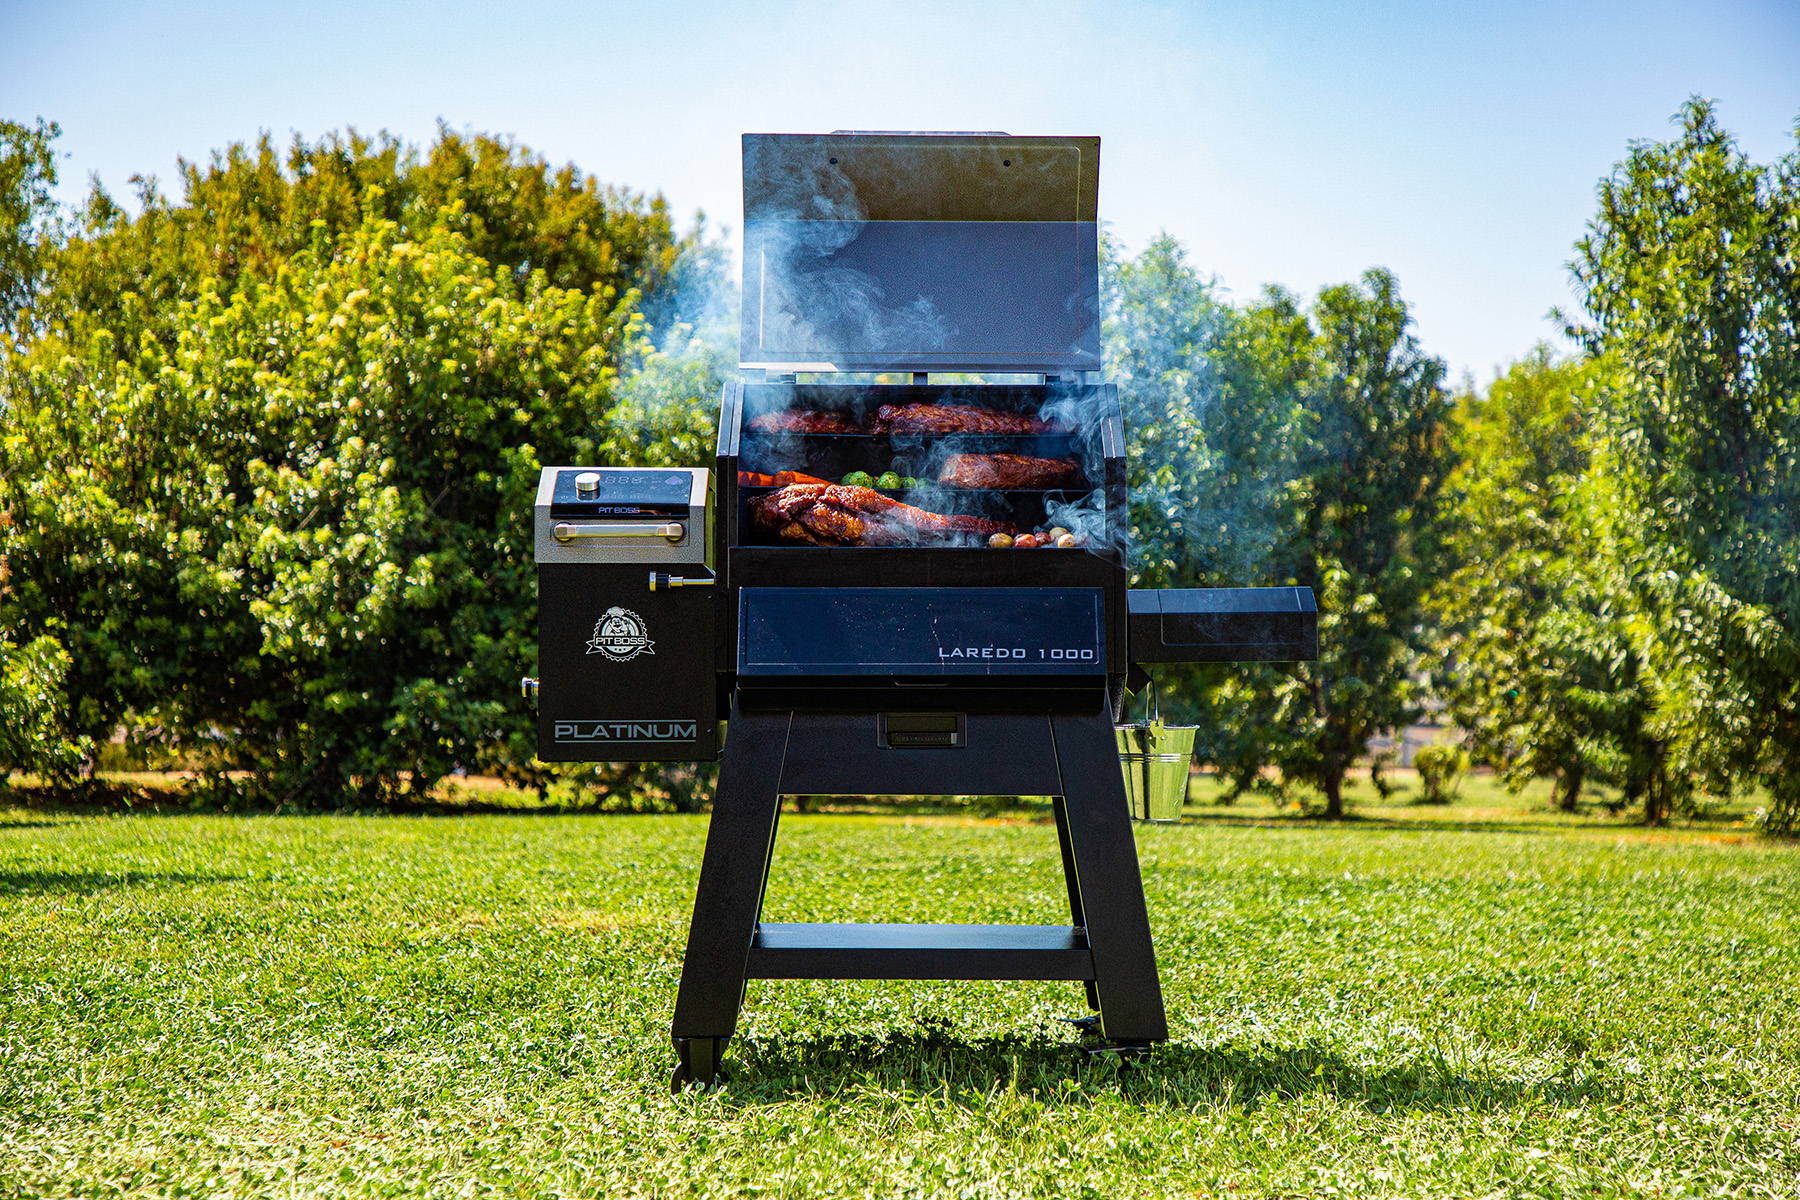 Pit Boss Platinum Laredo 1000 Sq. in. Wi-Fi® and Bluetooth® Enabled Wood Pellet Grill and Smoker - image 5 of 12